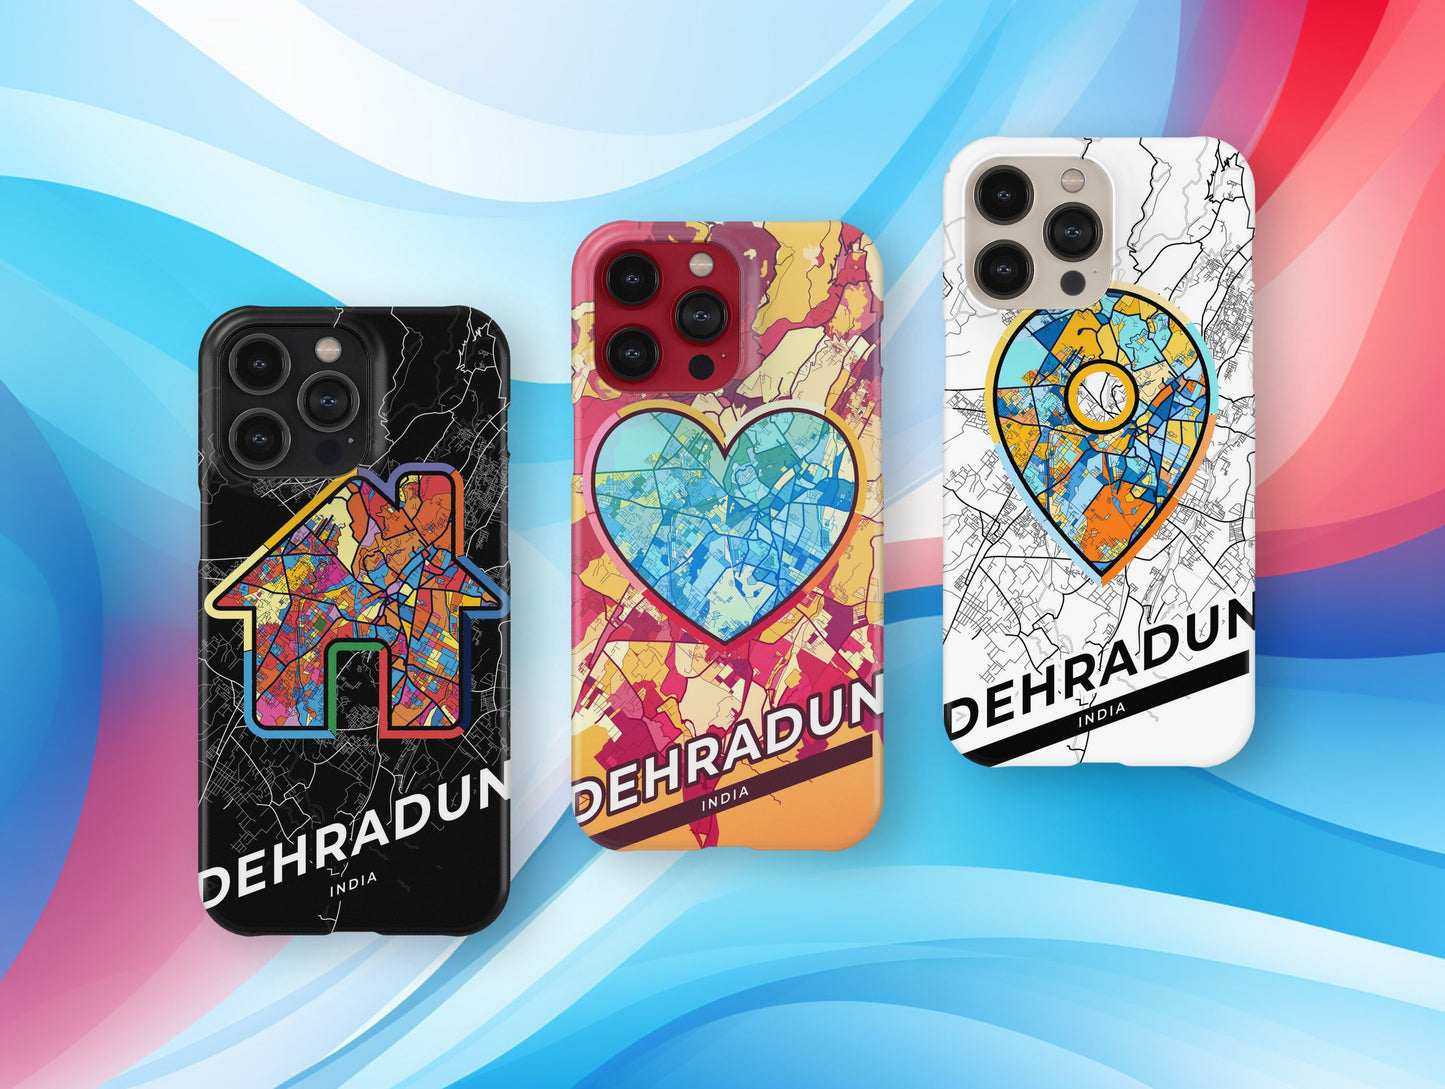 Dehradun India slim phone case with colorful icon. Birthday, wedding or housewarming gift. Couple match cases.